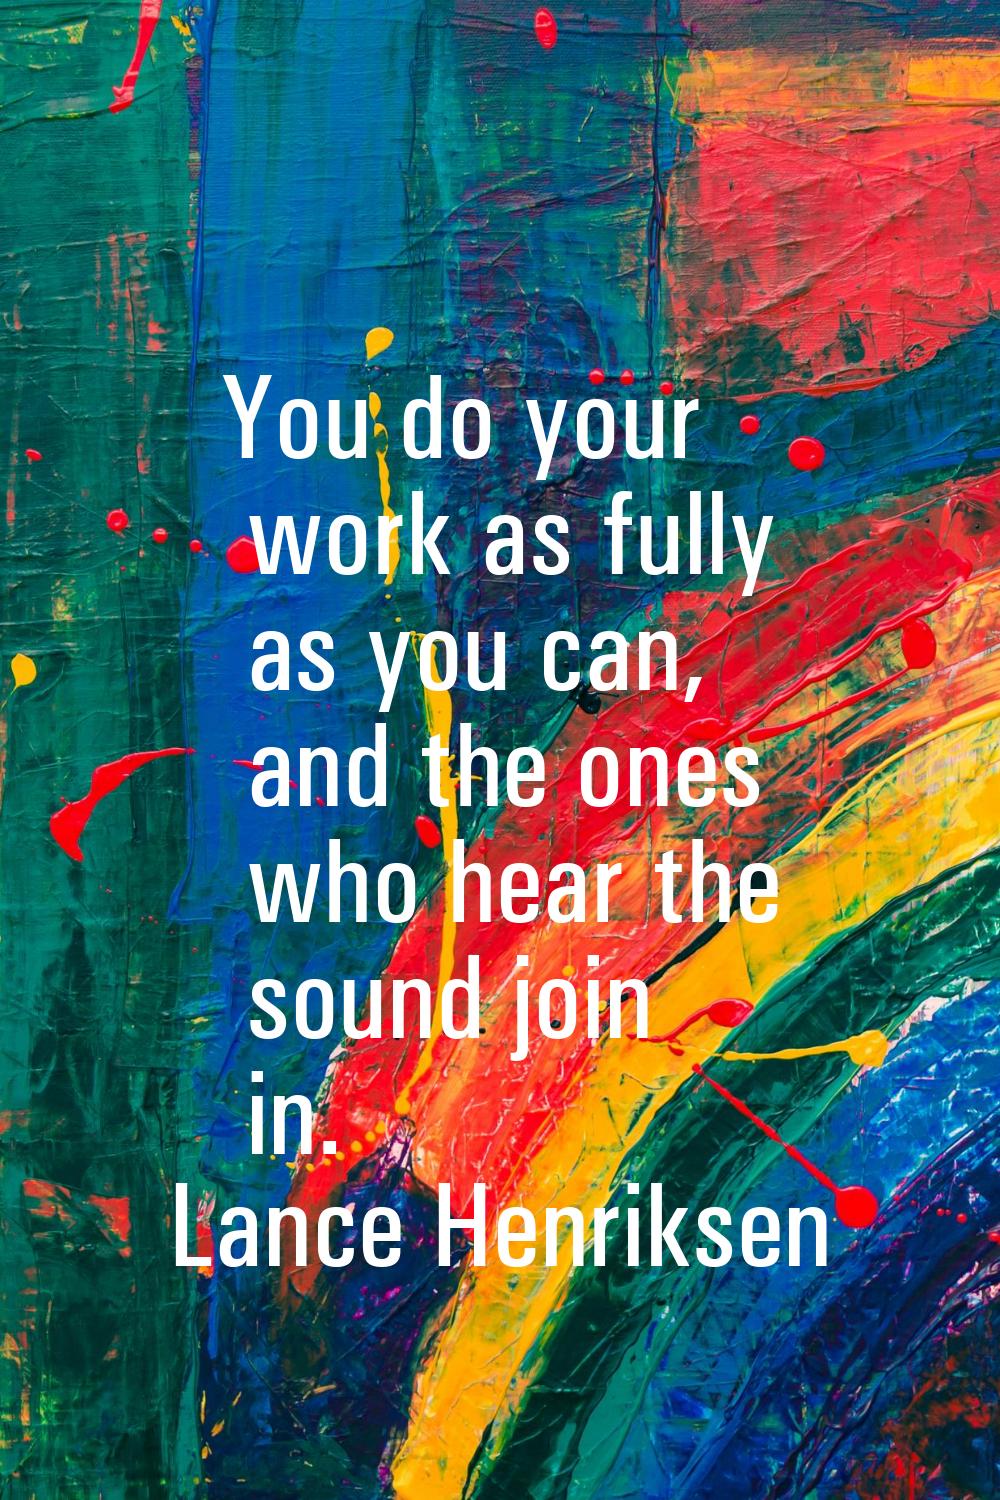 You do your work as fully as you can, and the ones who hear the sound join in.